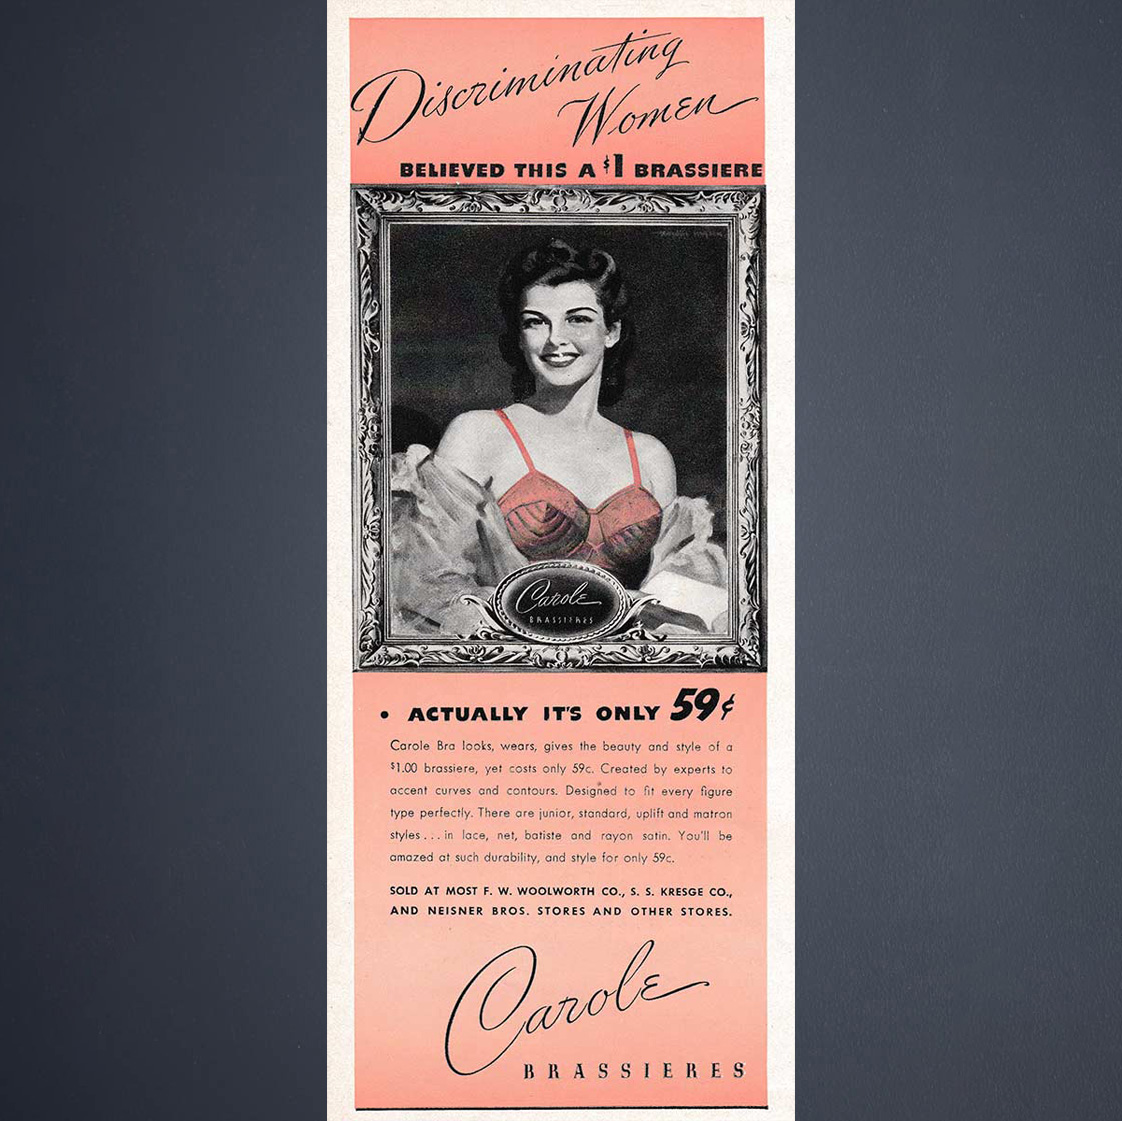 New to our digital collection, this 1940s advertisement for a brassiere by Carole Brassieres plays up the inexpensive cost of the product, claiming that “Discriminating women believed this a $1 brassiere .. actually it’s only 59¢.” underpinningsmuseum.com/museum-collect…